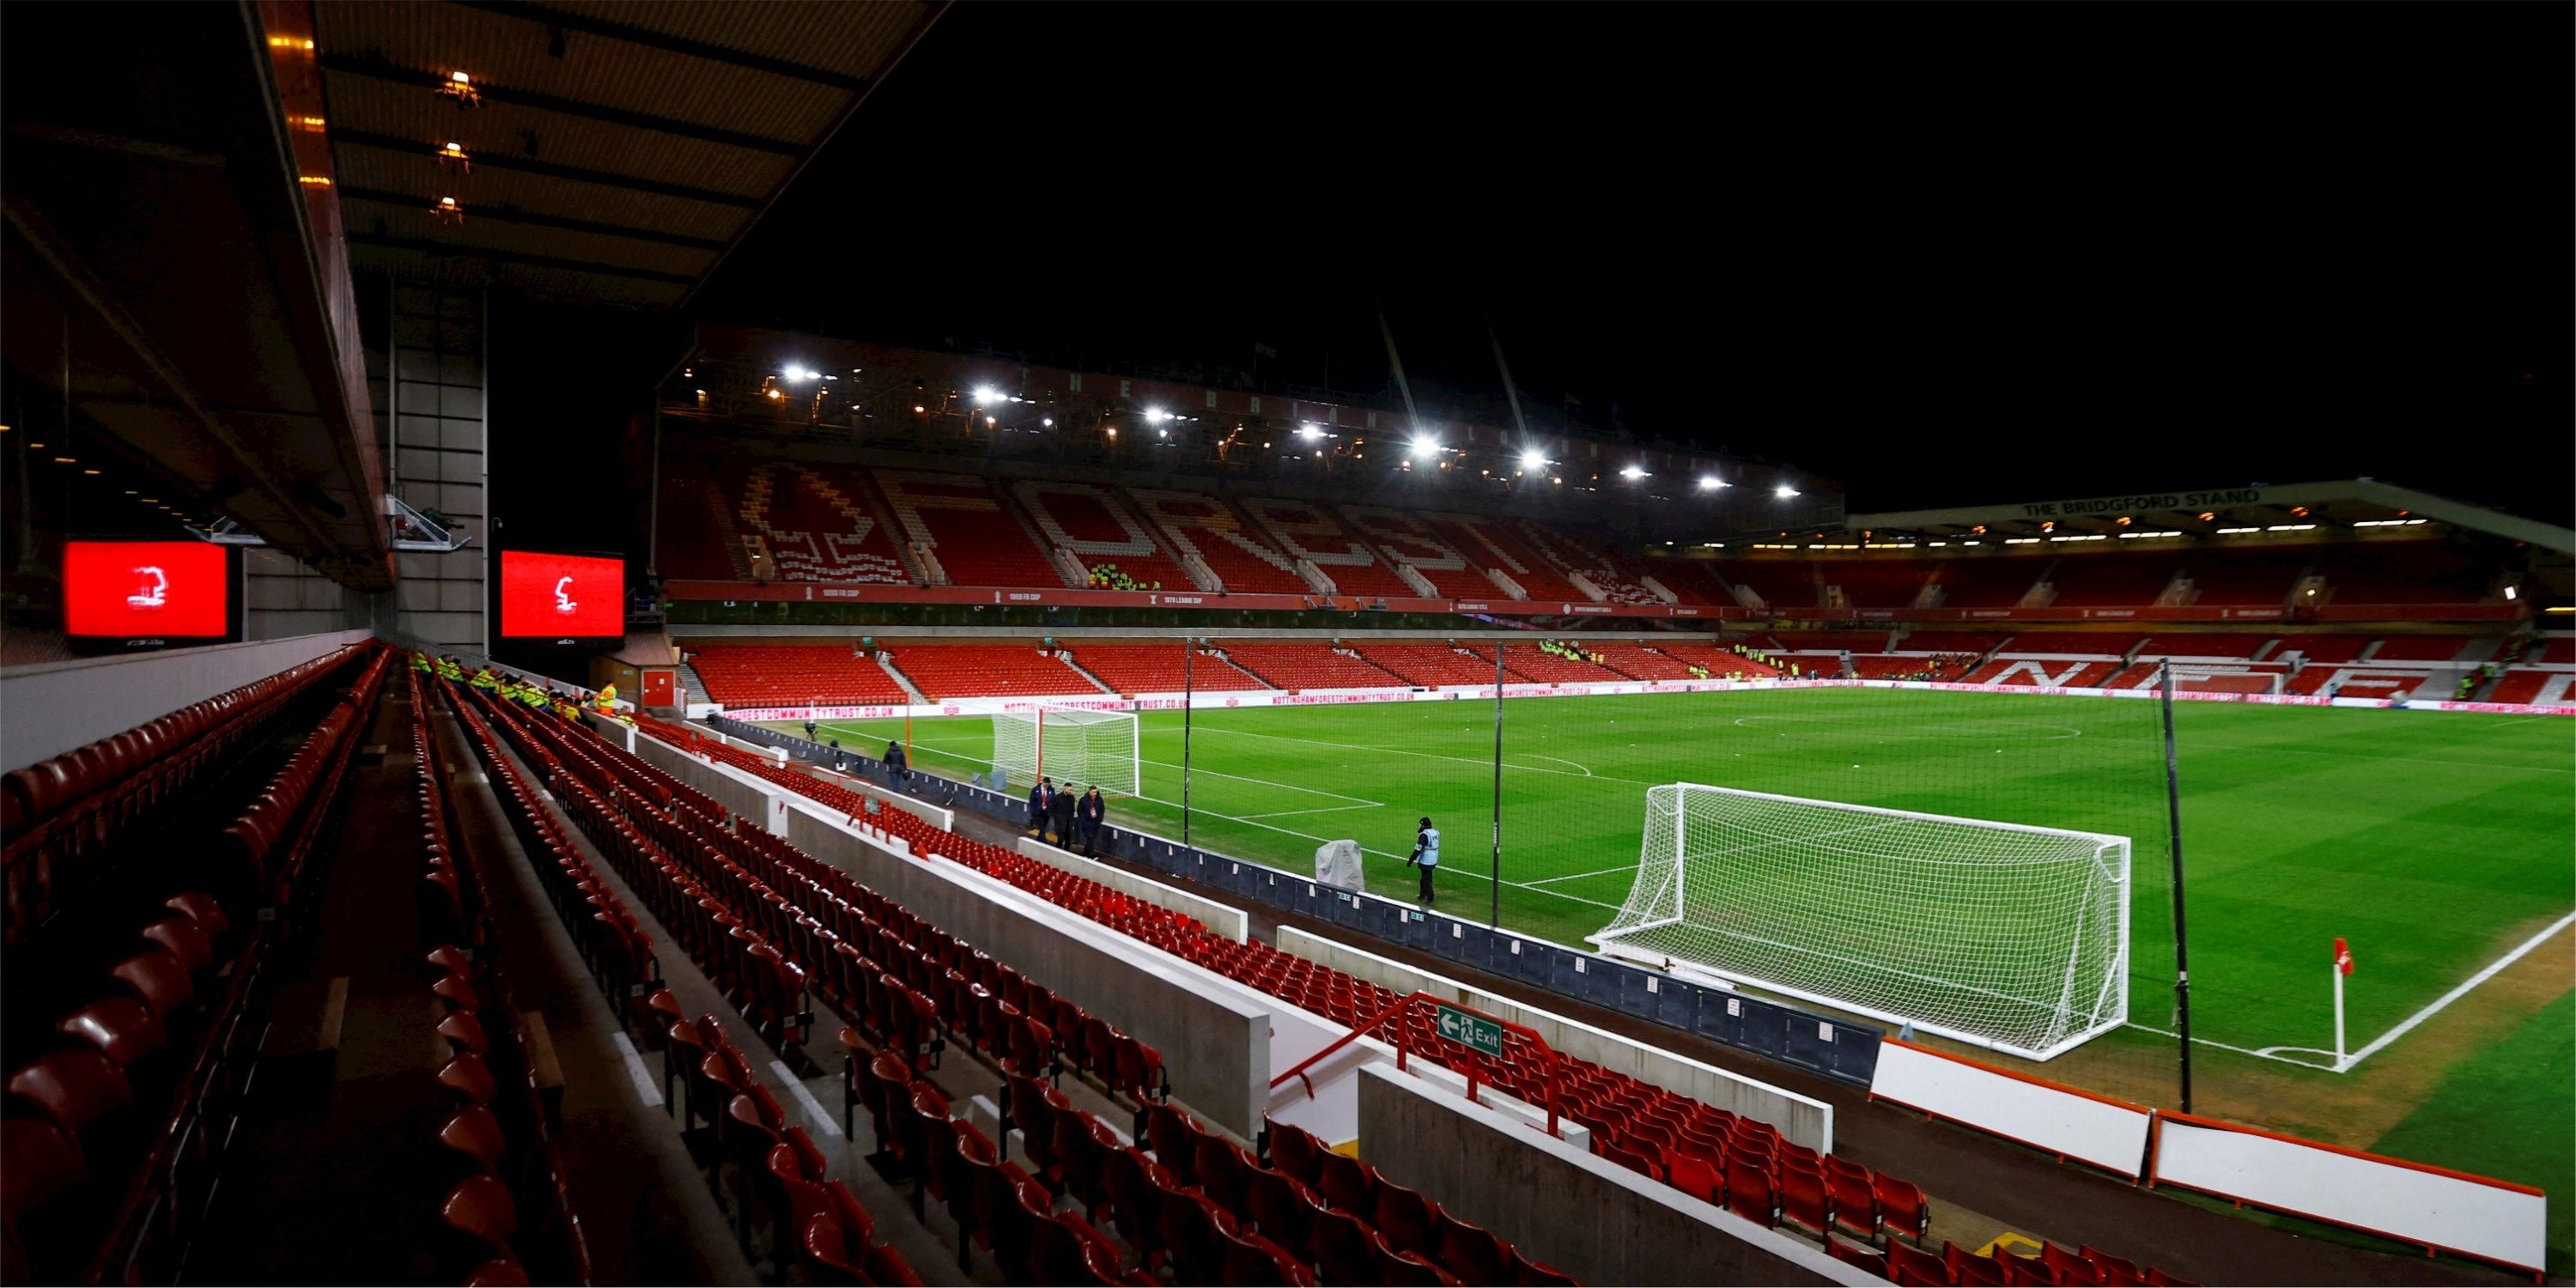 nottingham forest eyeing move to sign £25,000-a-week england international